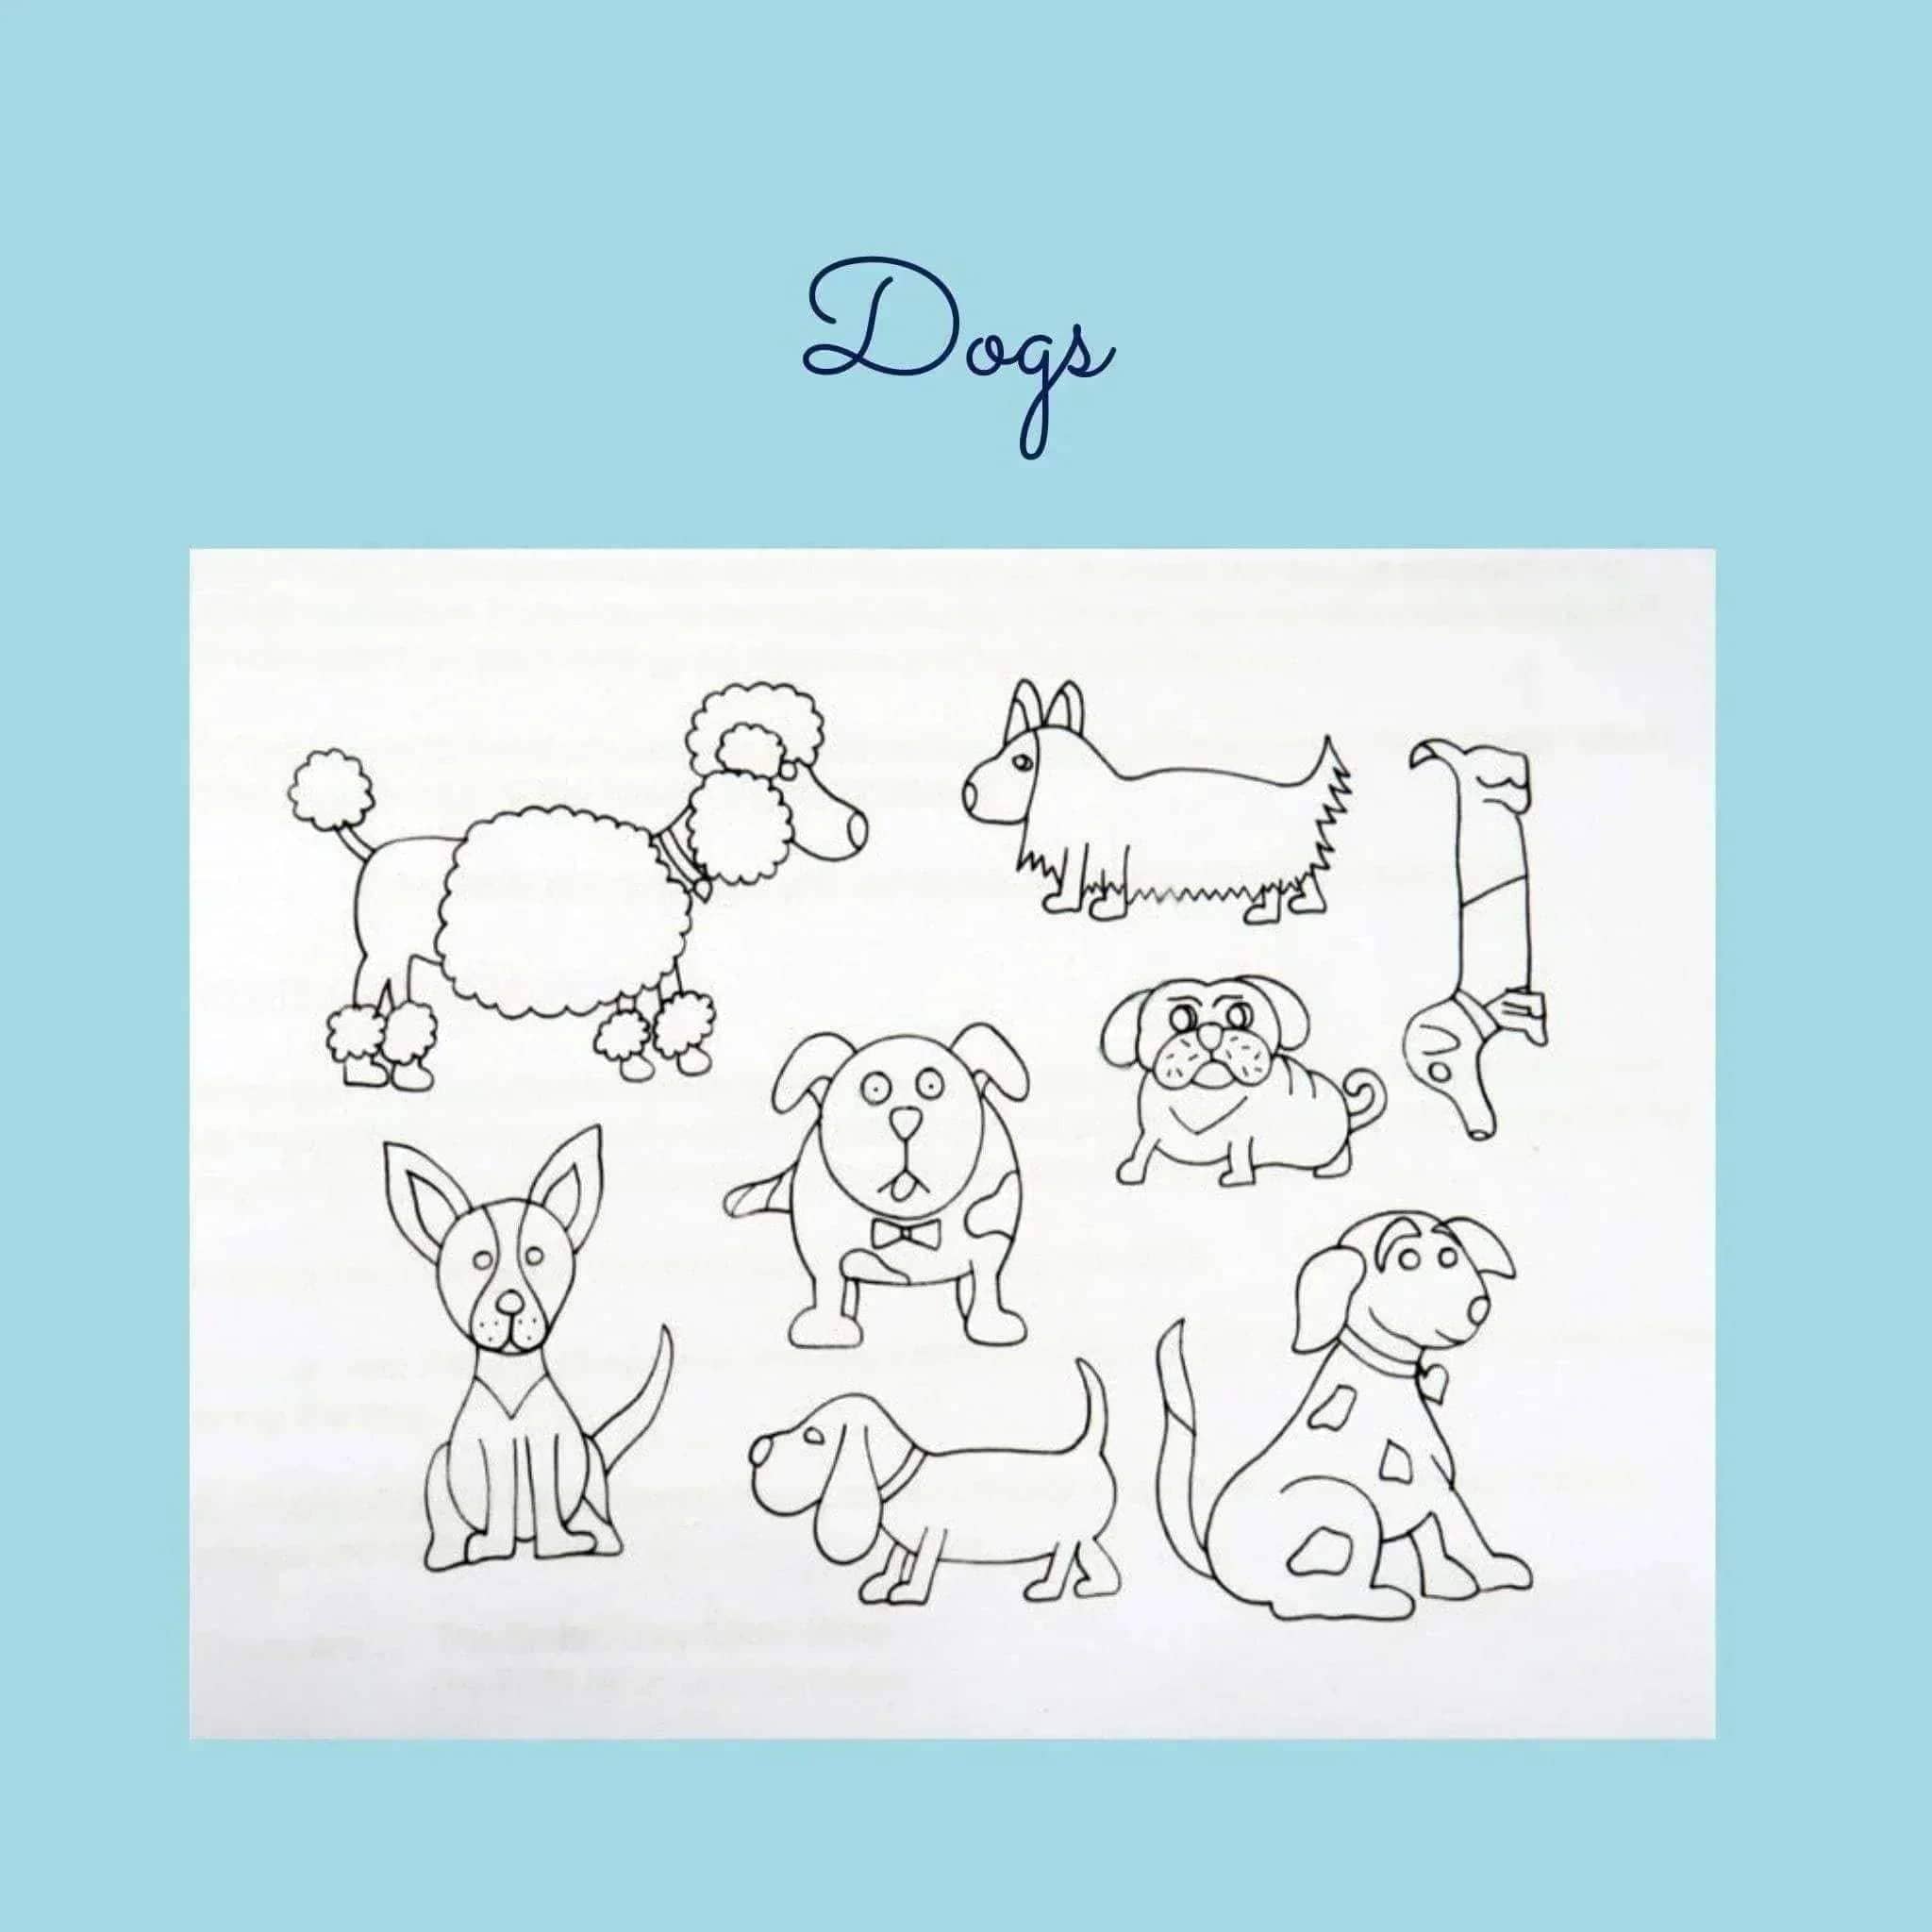 Dog Breeds Hand Embroidery Template , PDF Download , StitchDoodles , Embroidery, embroidery hoop, embroidery hoop kit, embroidery kits for adults, embroidery kits for beginners, embroidery pattern, hand embroidery, hand embroidery fabric, hand embroidery seat frame, modern embroidery kits, nurge embroidery hoop, PDF pattern, Printed Pattern, unique embroidery kits , StitchDoodles , shop.stitchdoodles.com